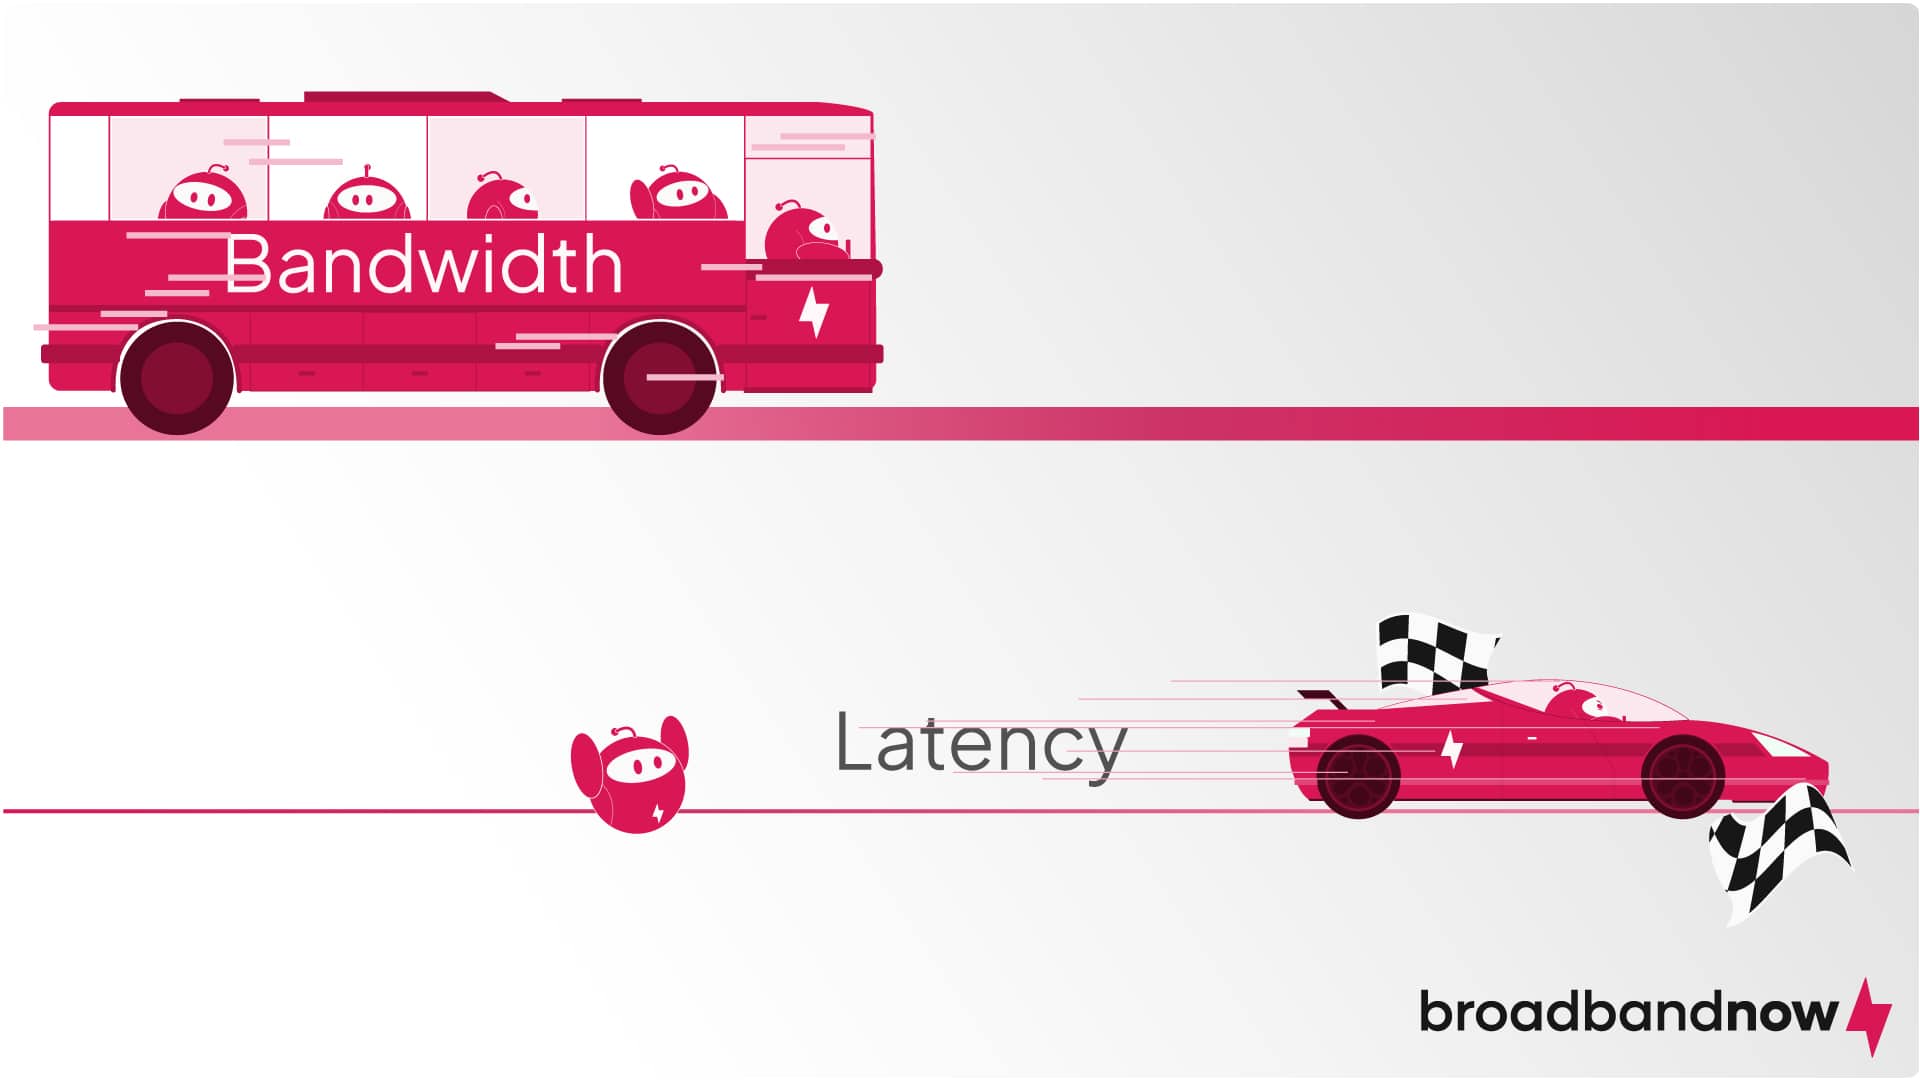 Graphic depicting a slower bandwidth bus and a quick latency race car